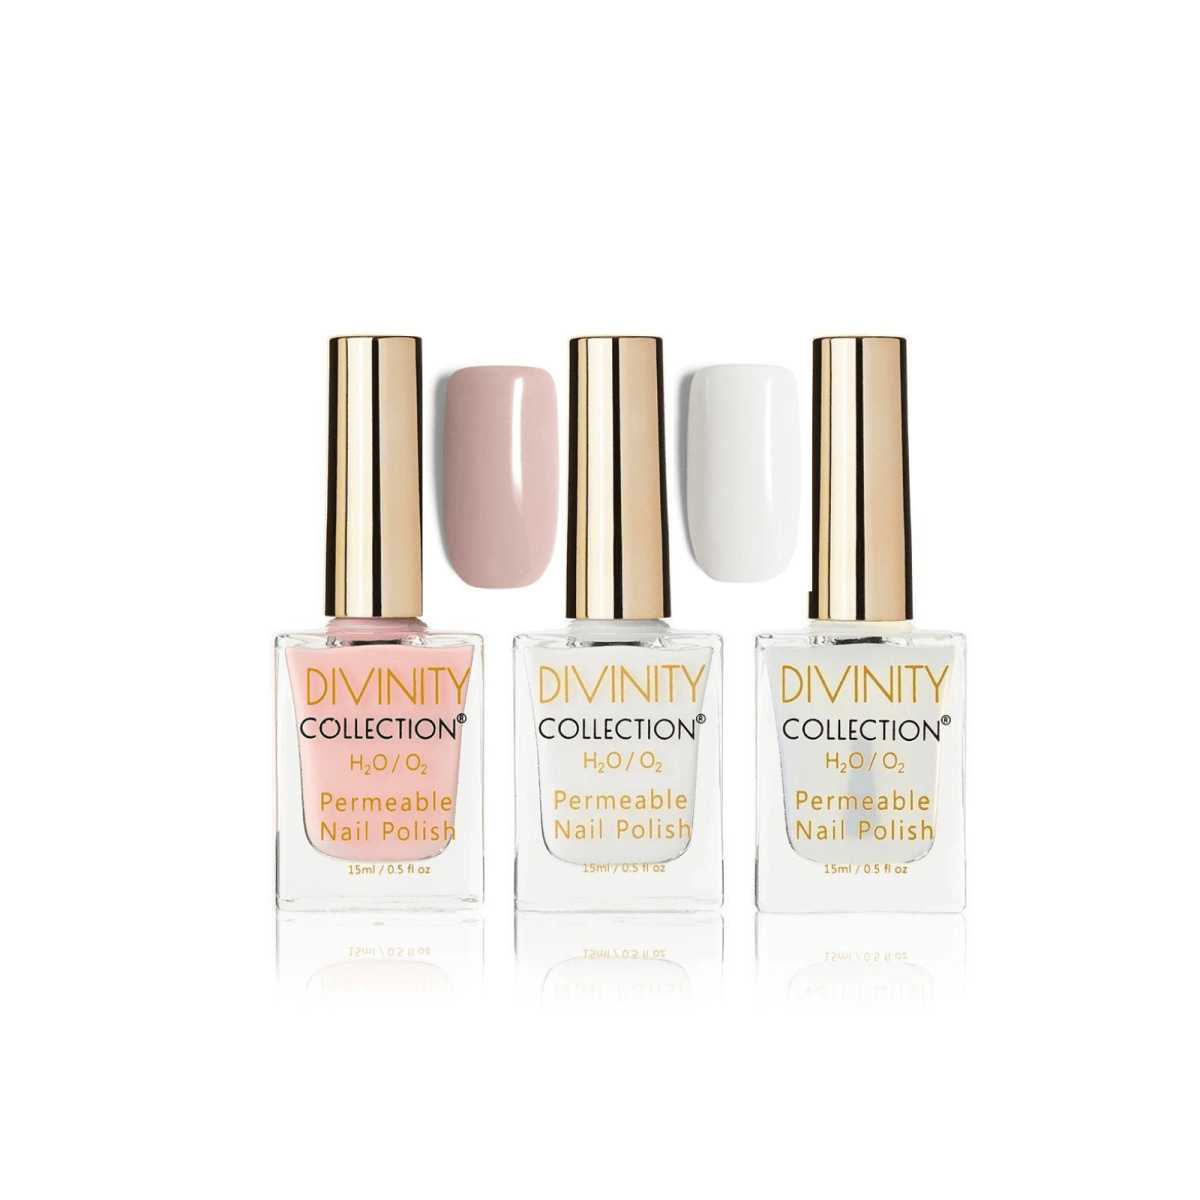 Nude French Manicure Bundle Halal Nail Polish - Divinity Collection